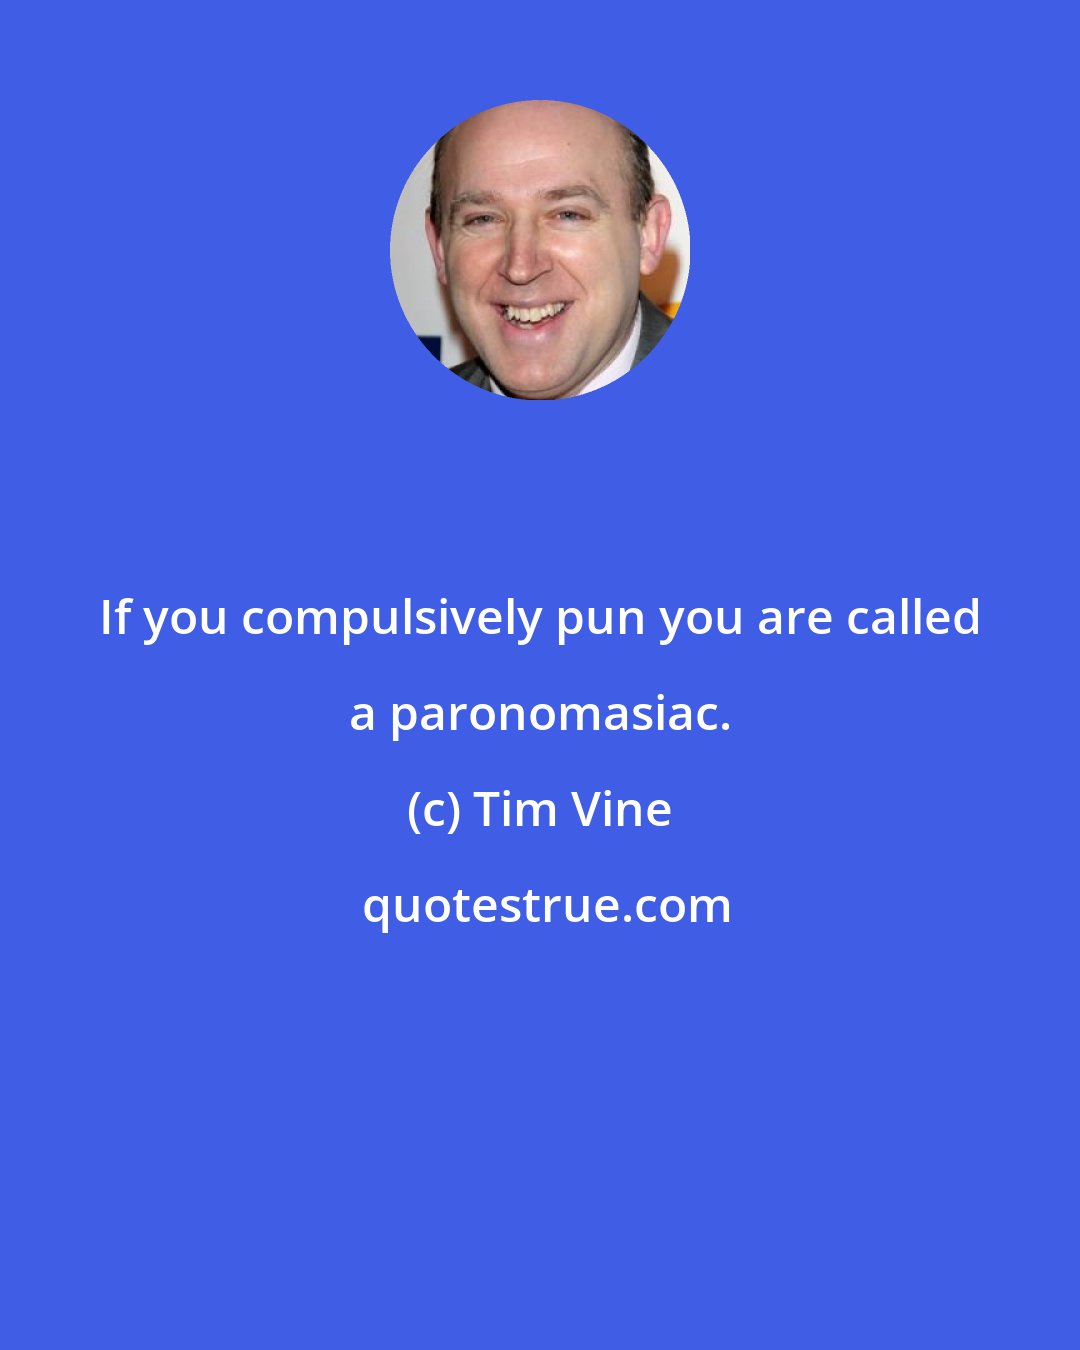 Tim Vine: If you compulsively pun you are called a paronomasiac.